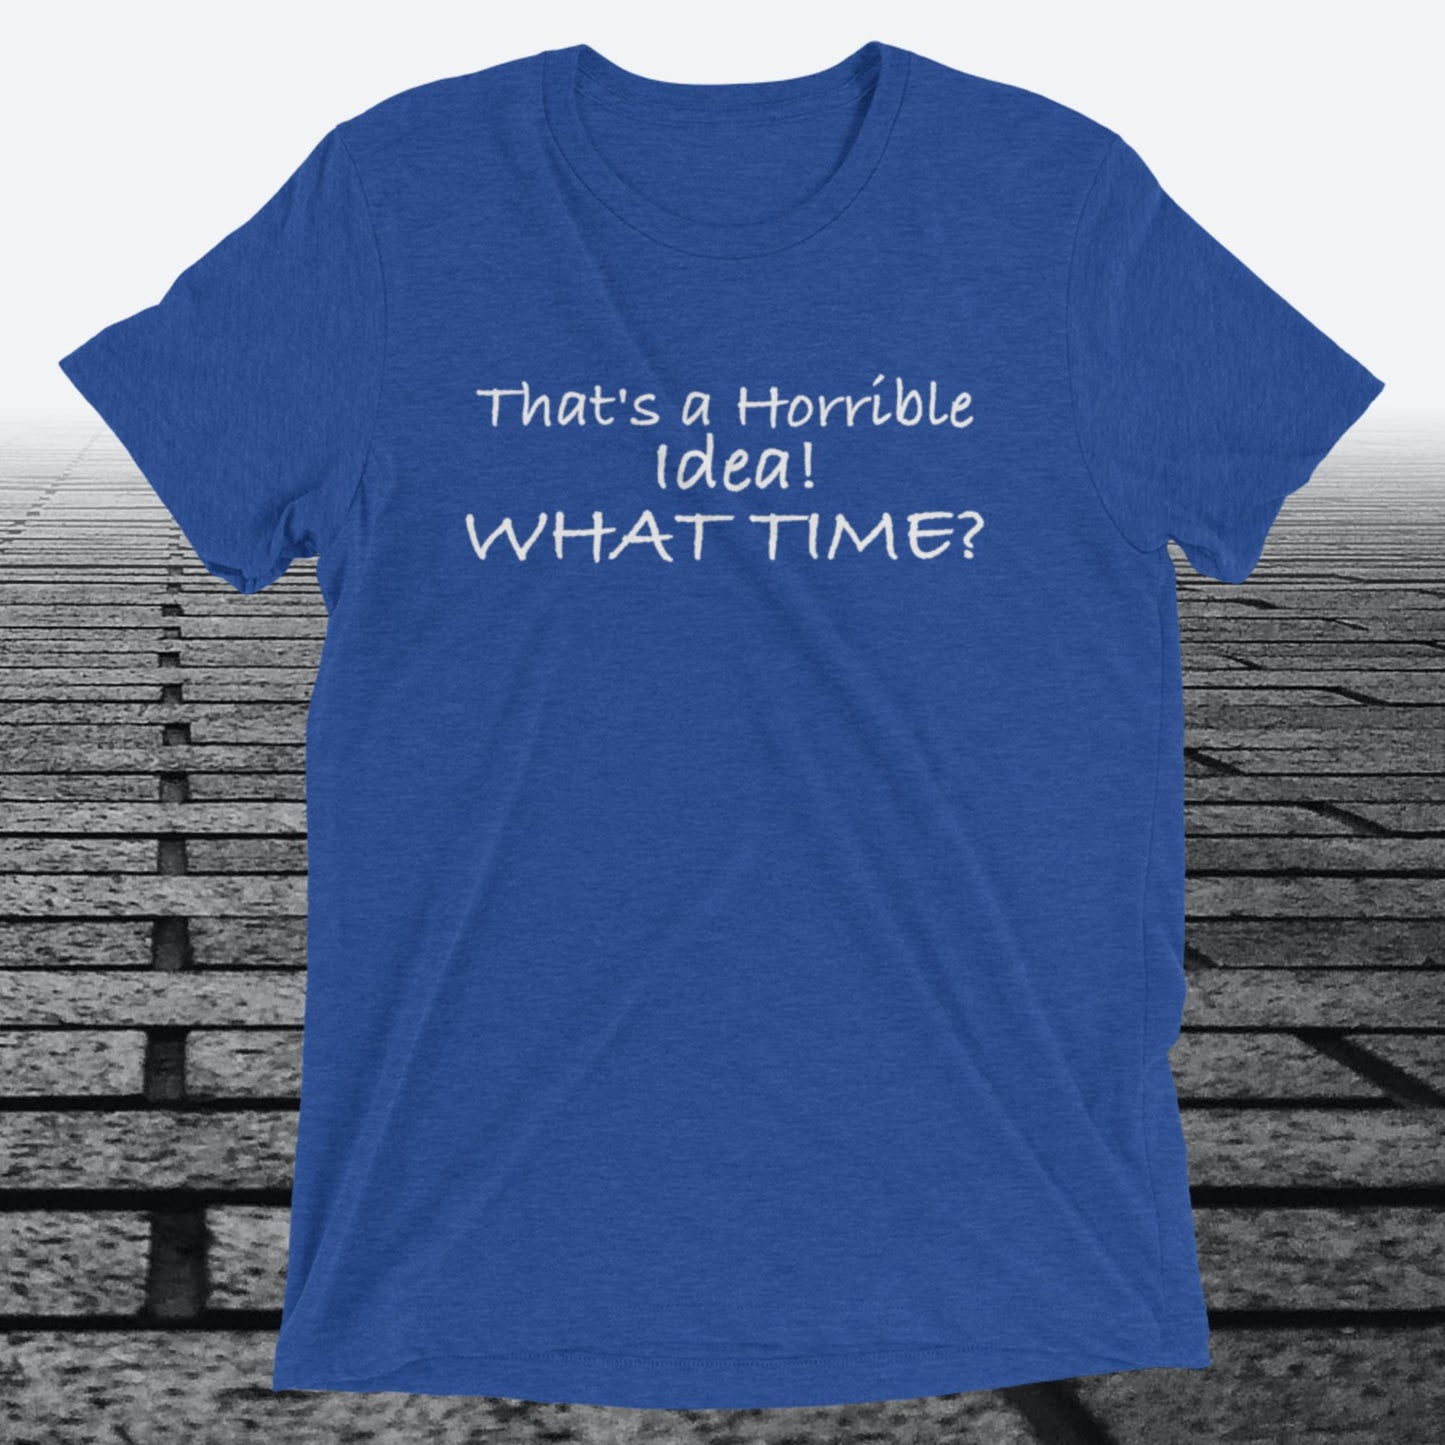 That's a Horrible Idea! What Time?, Triblend T-shirt